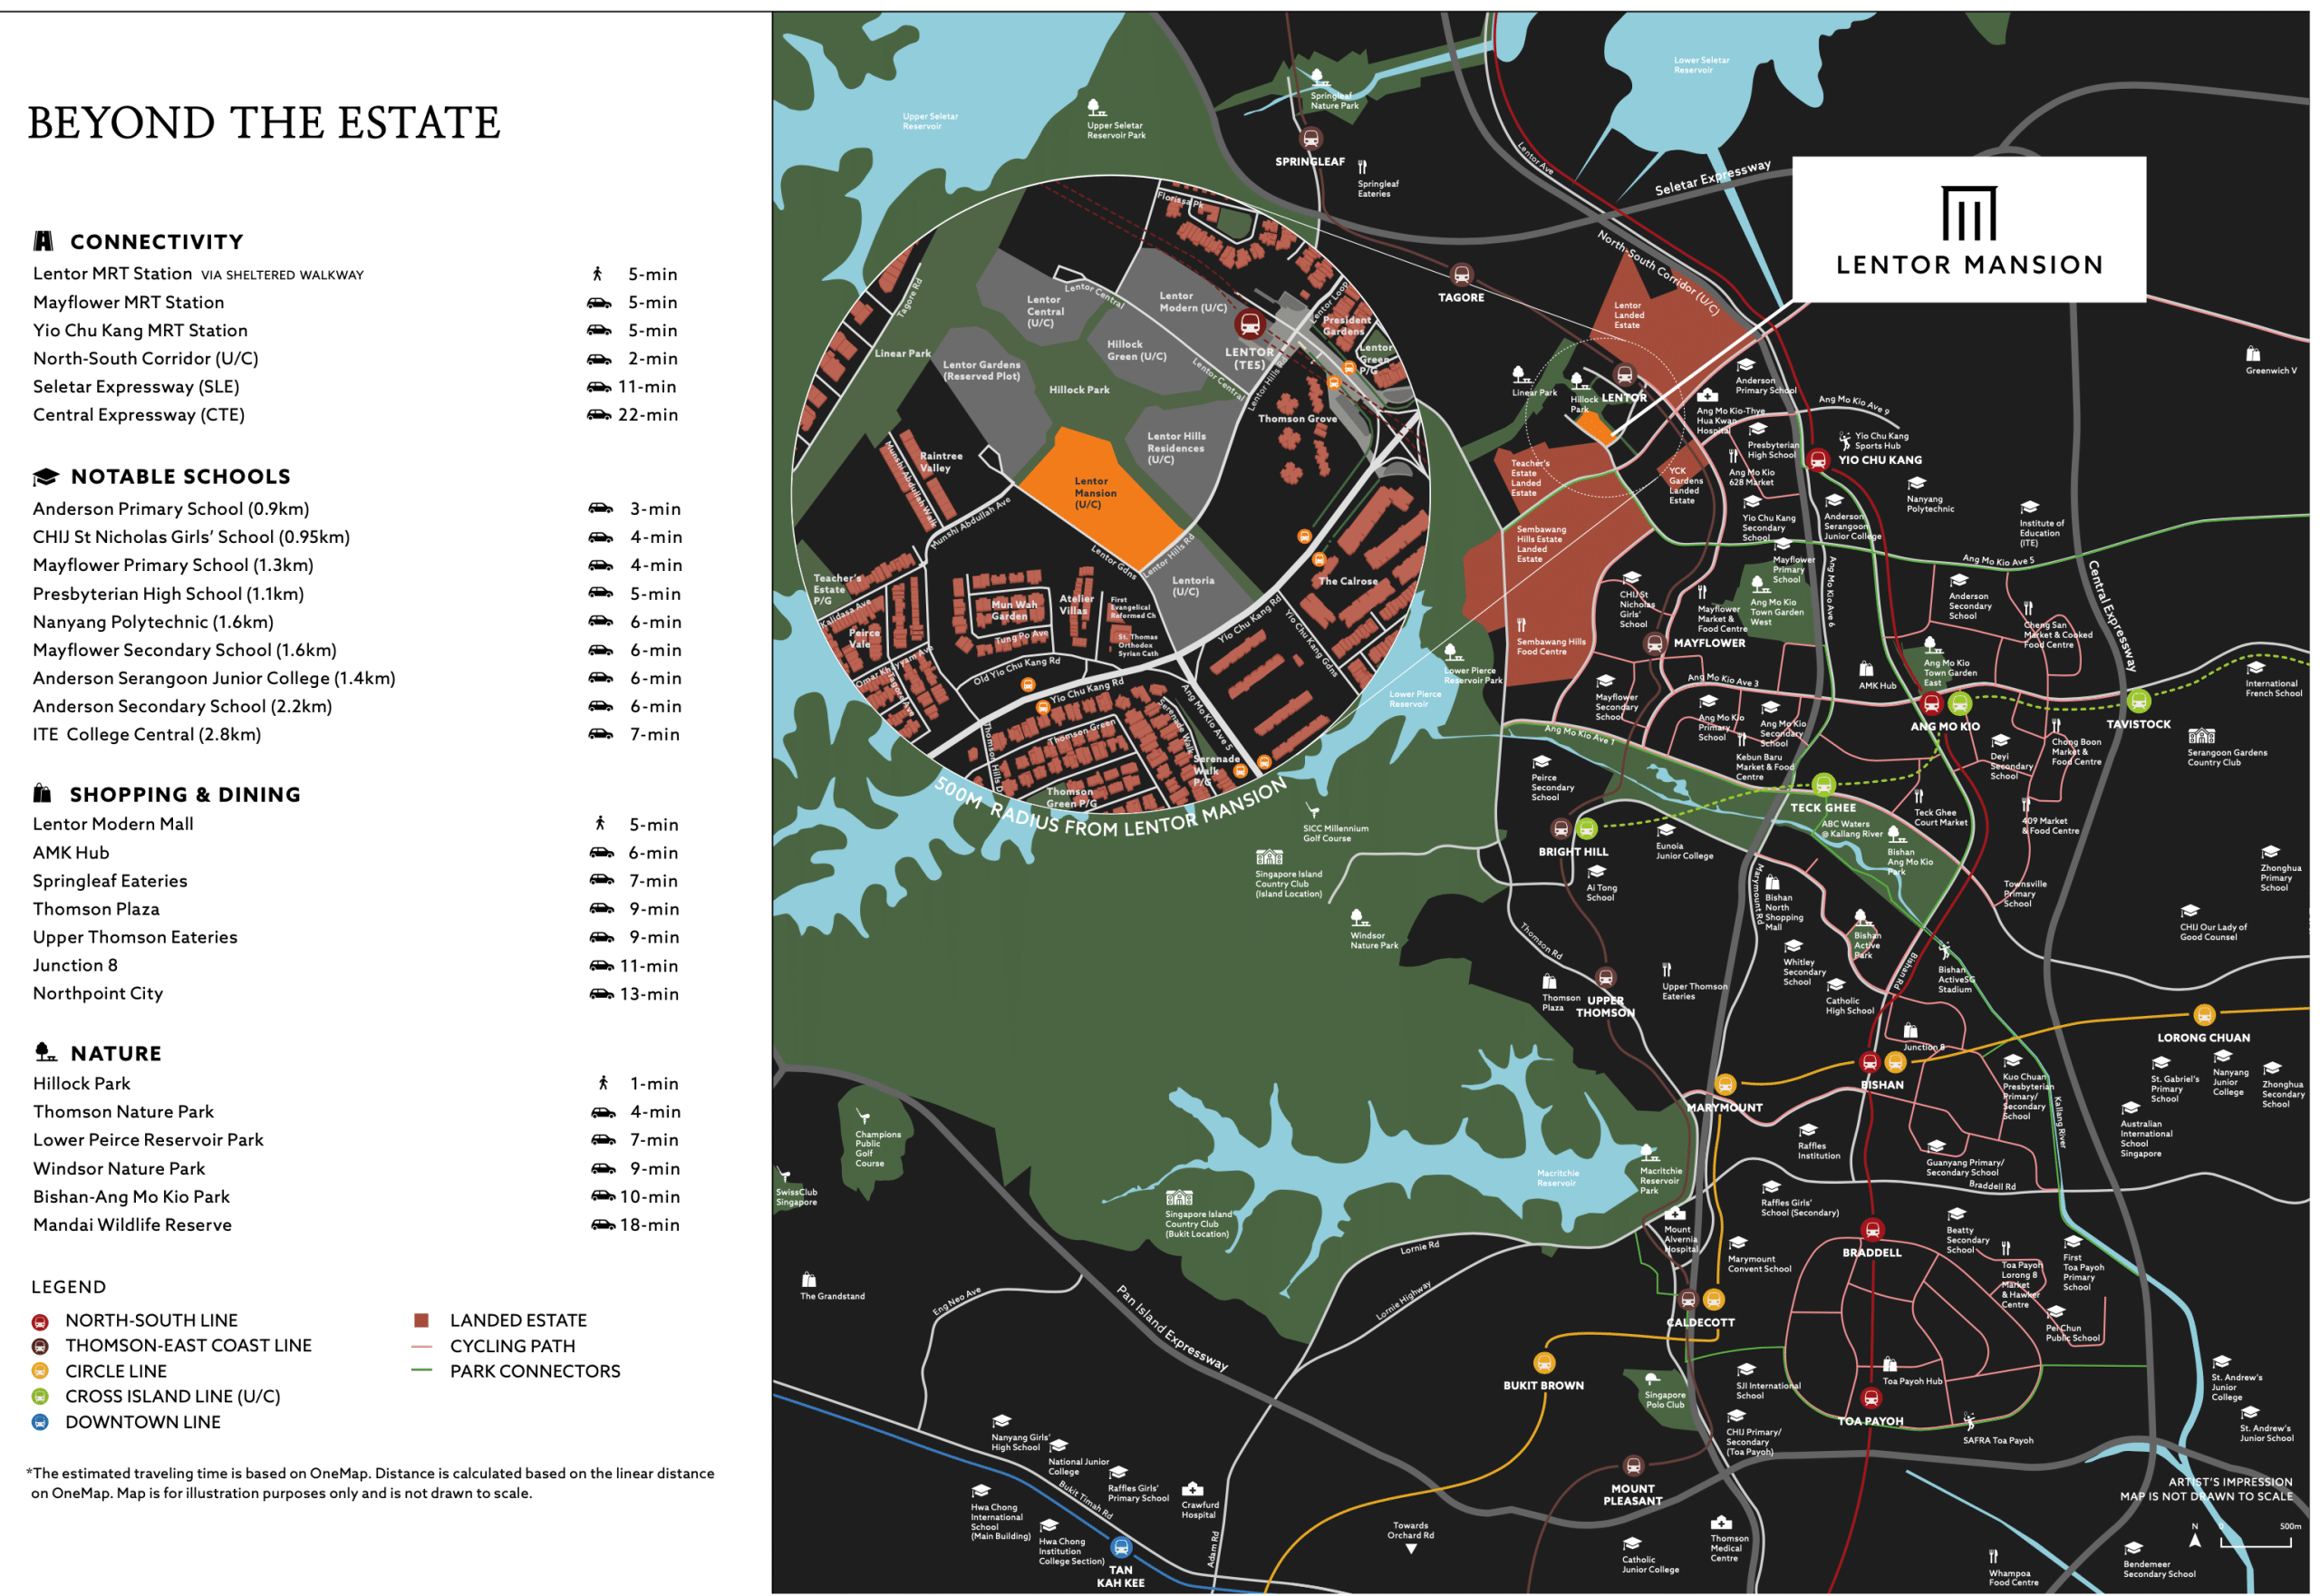 lentor-mansion-location-map-with-amenities-singapore